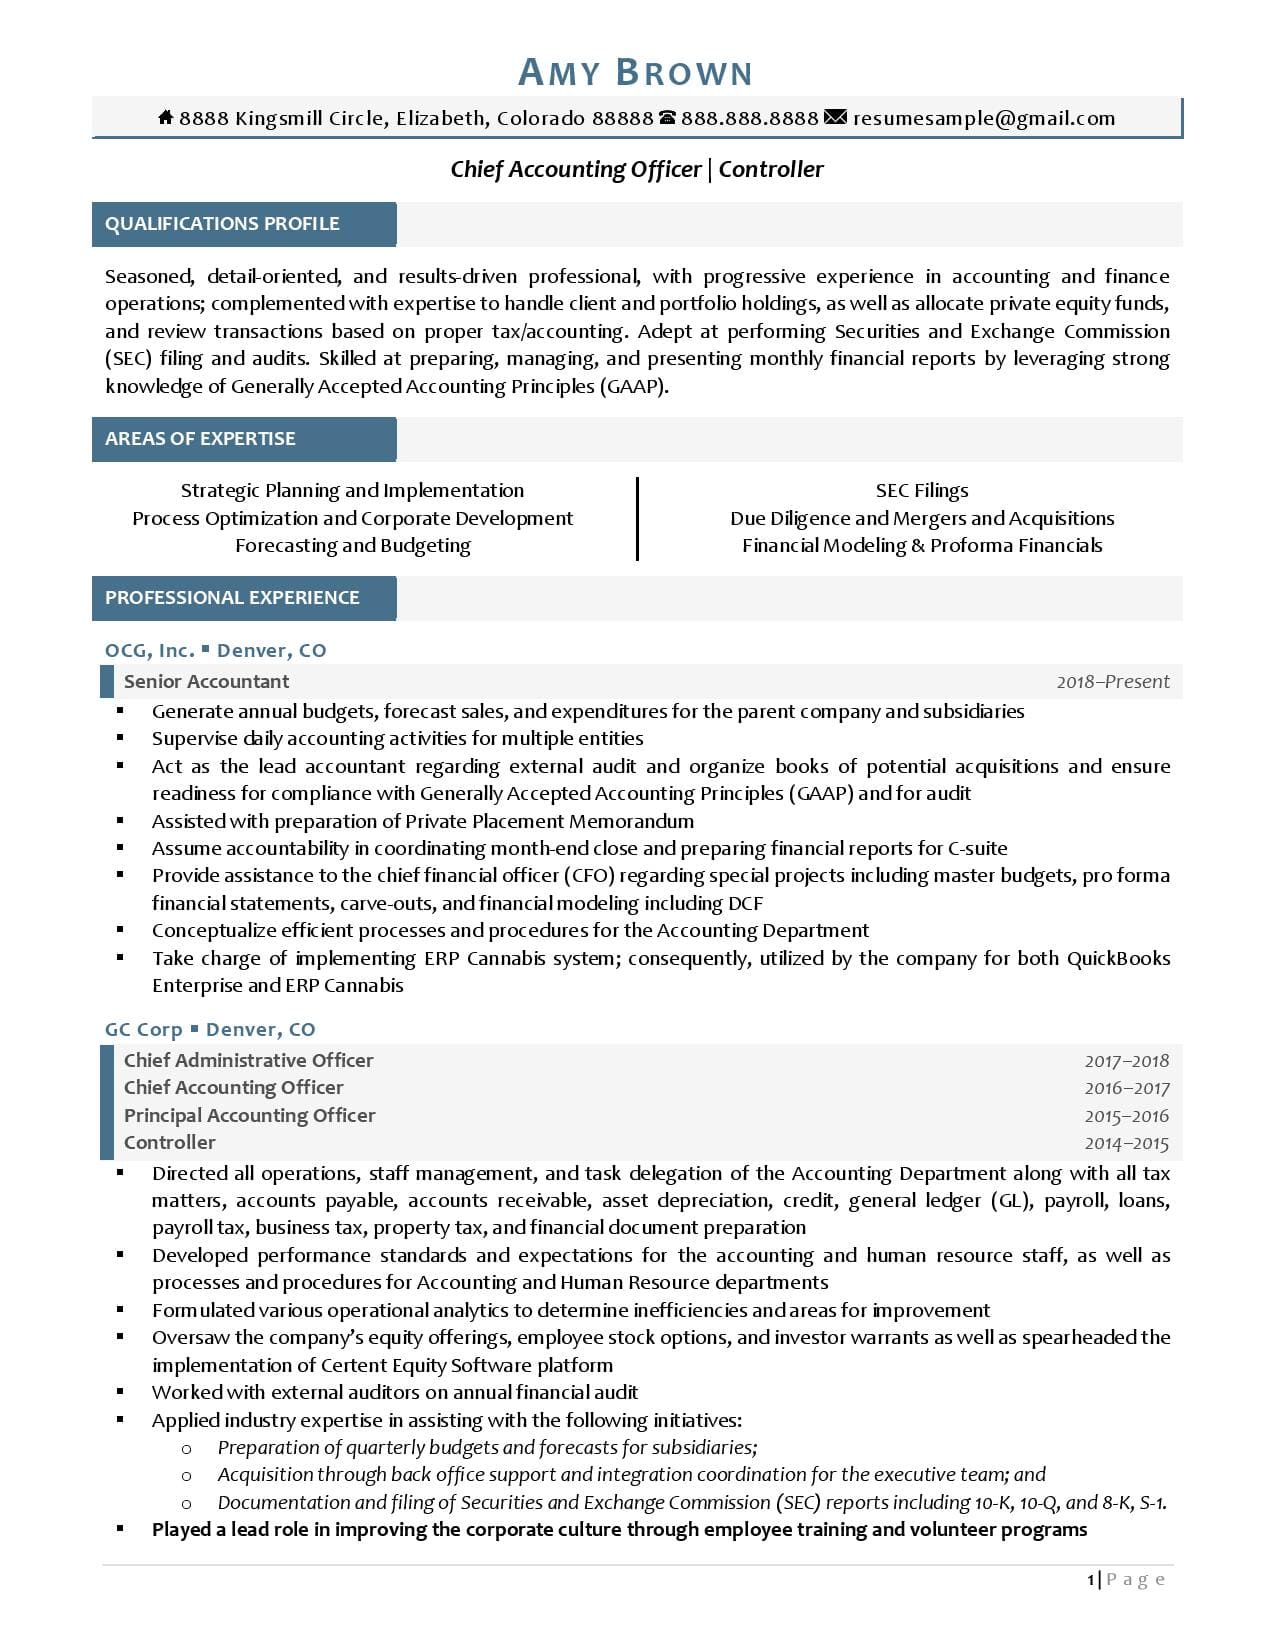 sample resume for chief accountant